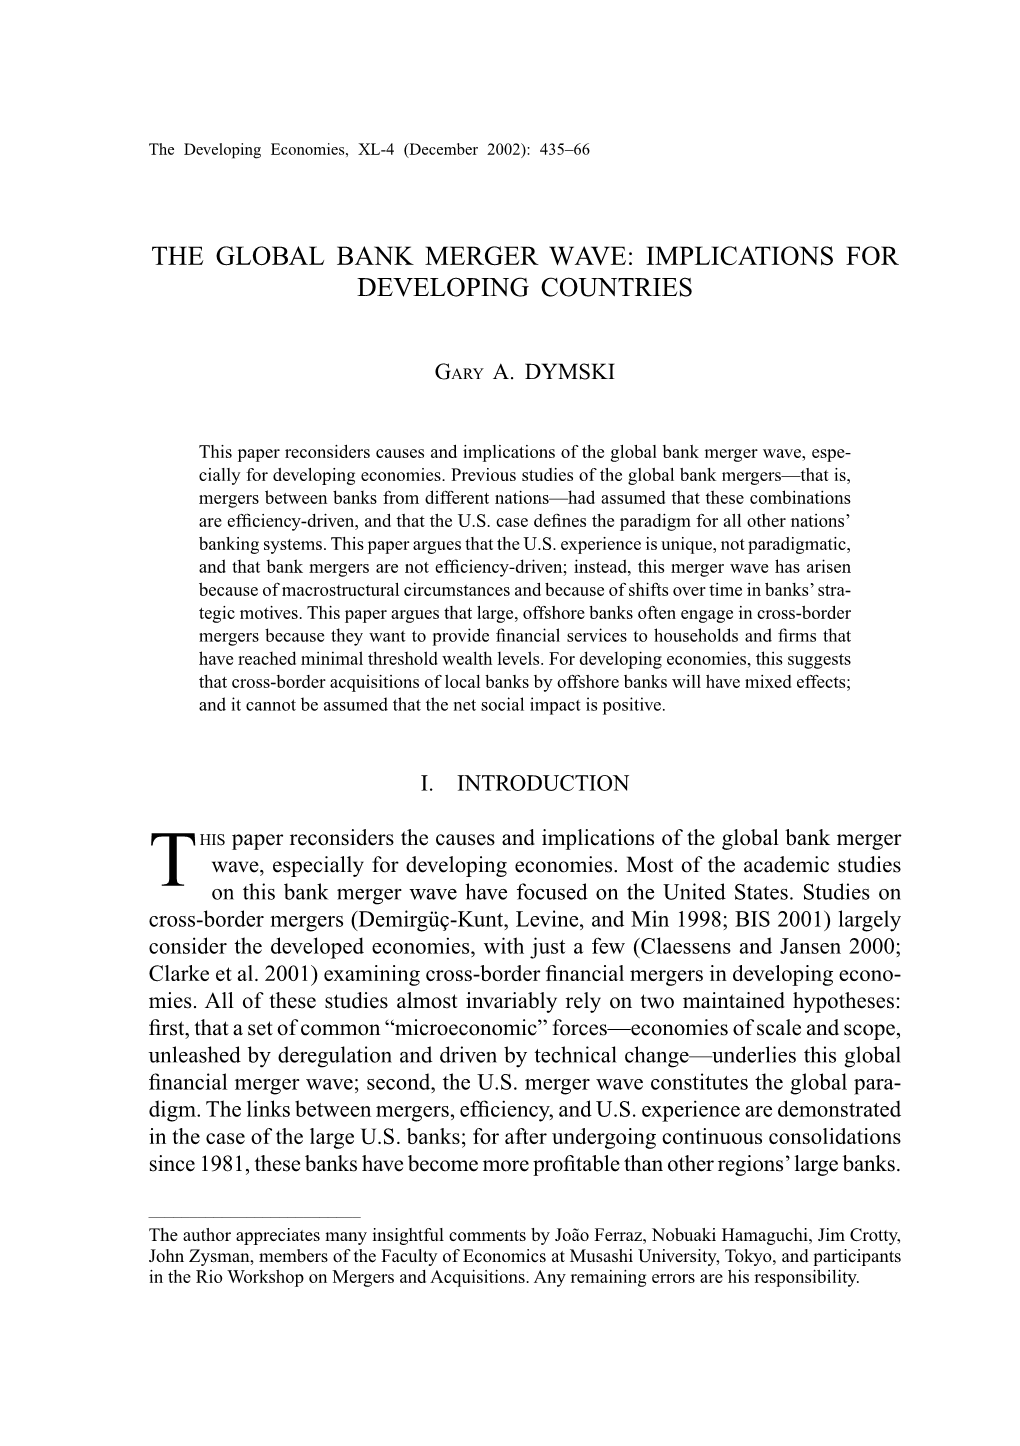 The Global Bank Merger Wave: Implications for Developing Countries